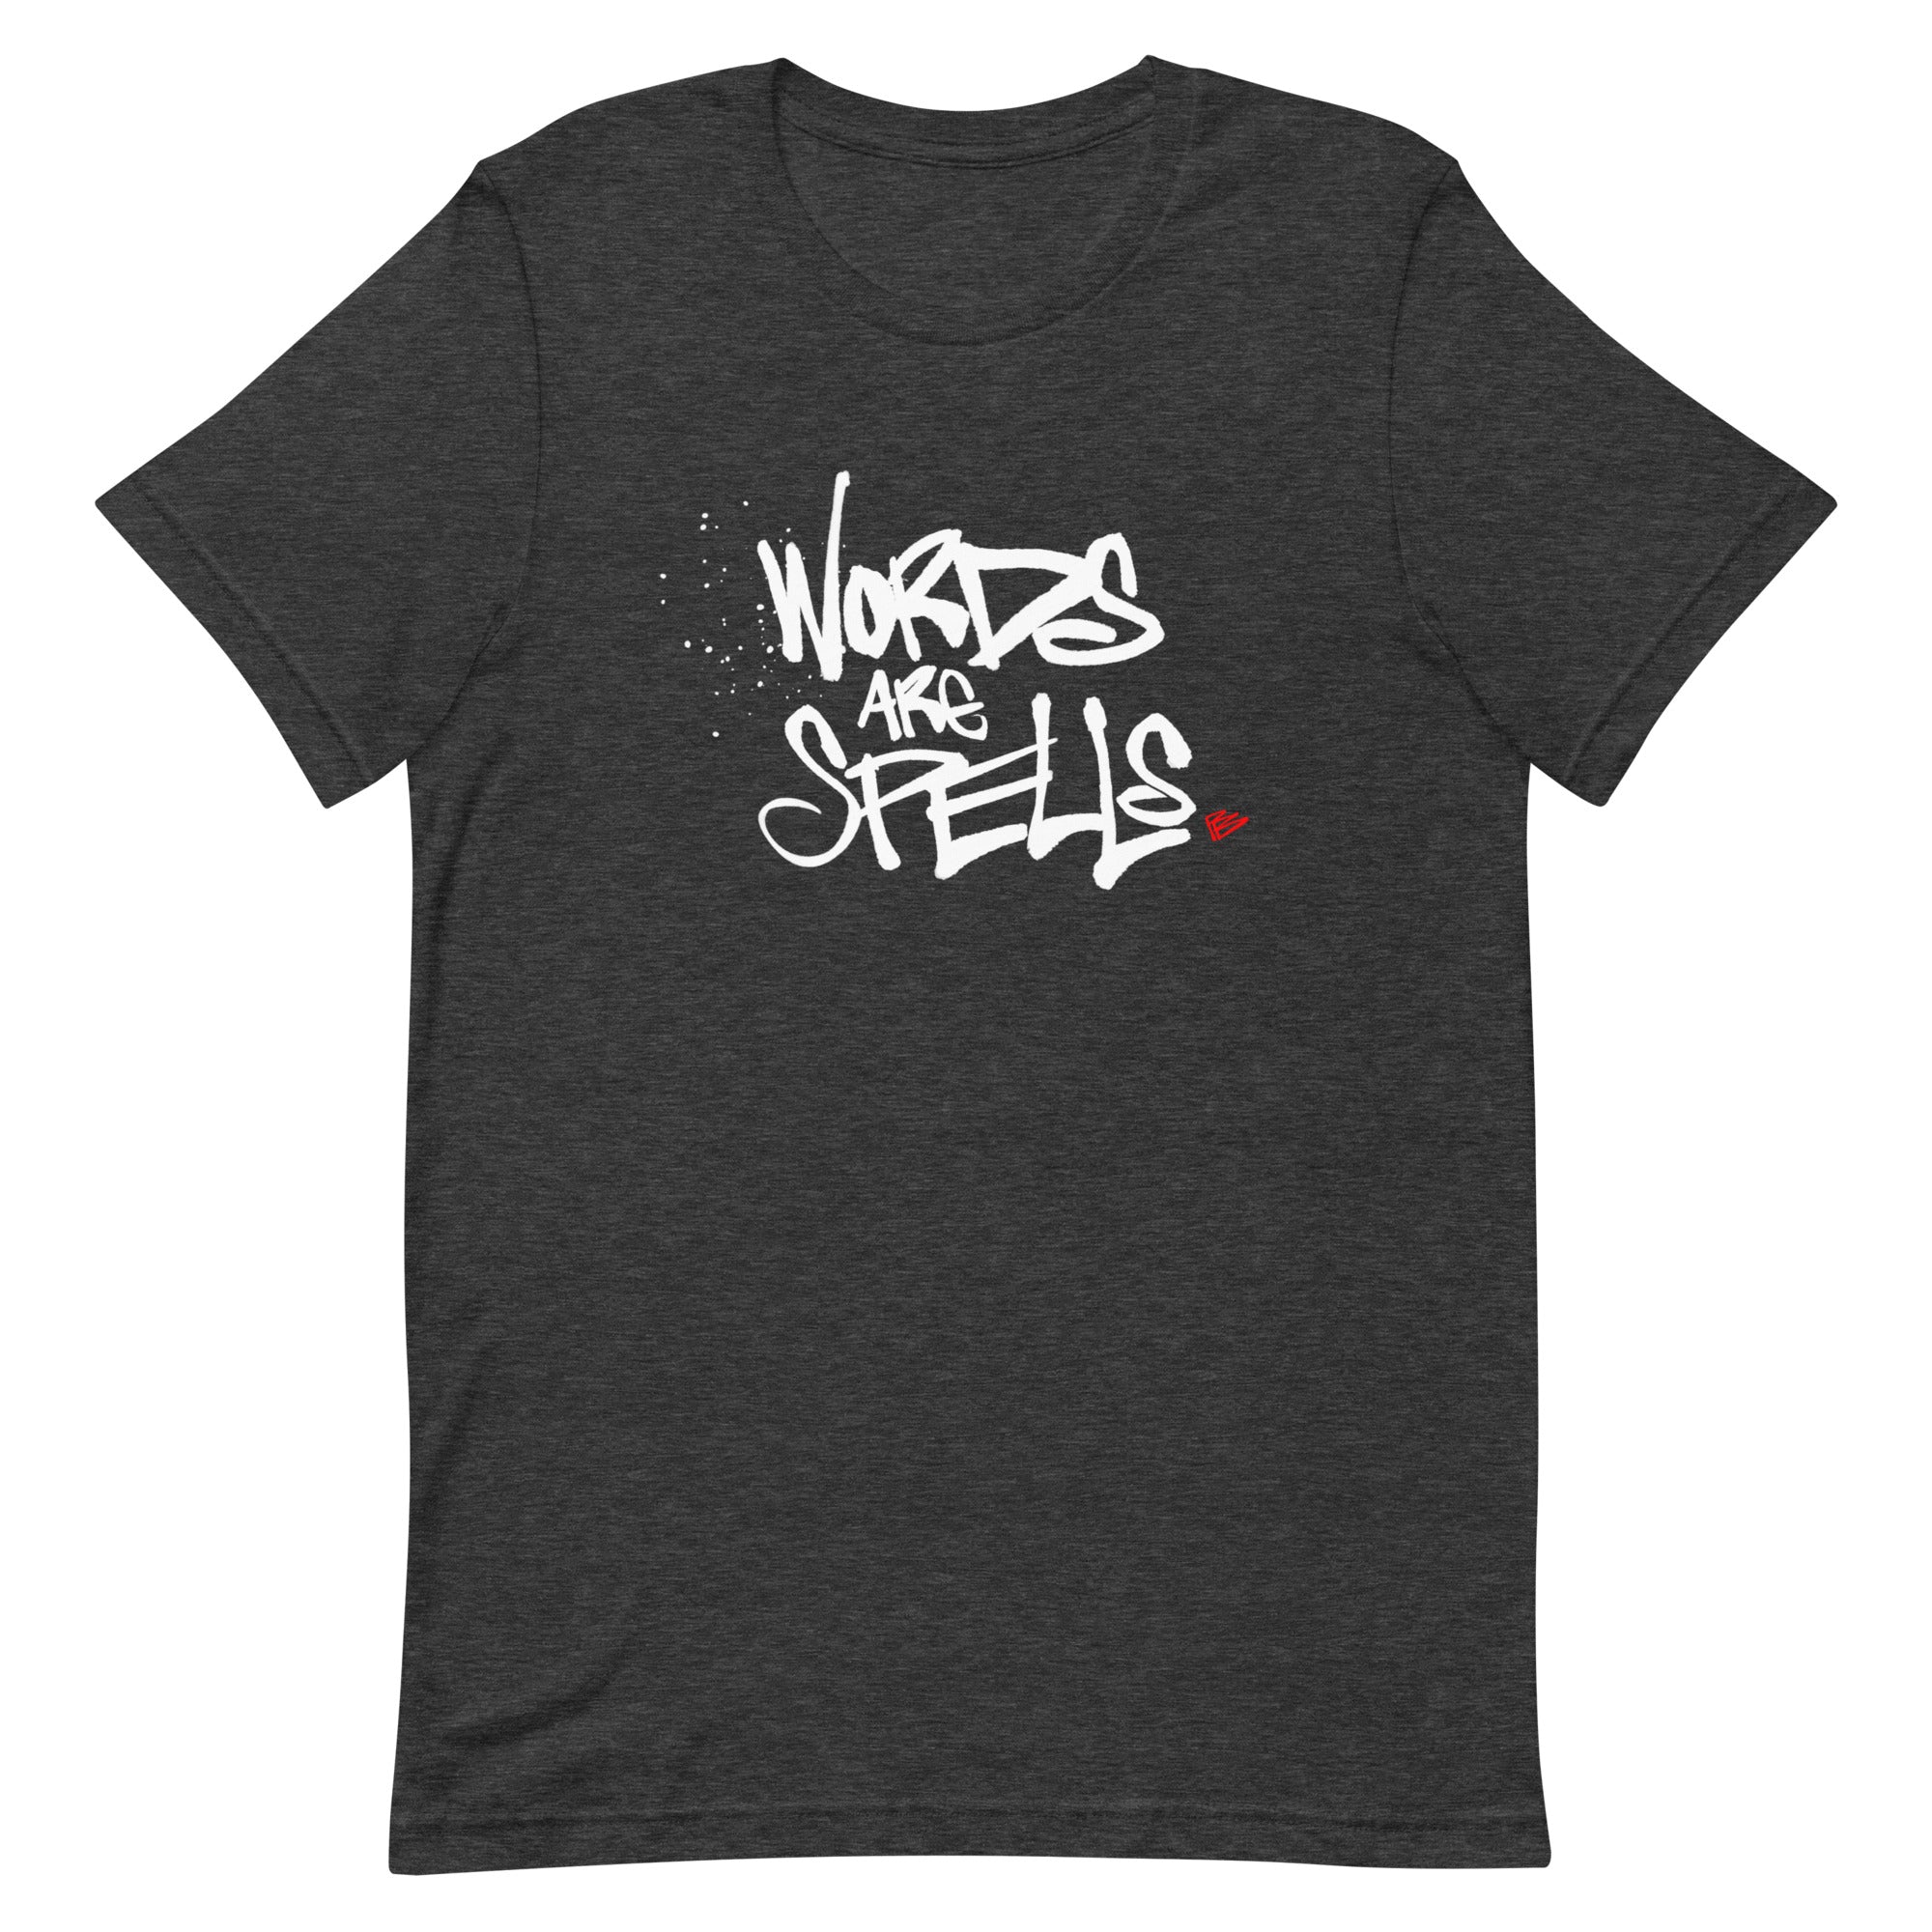 Words Are Spells - t-shirt